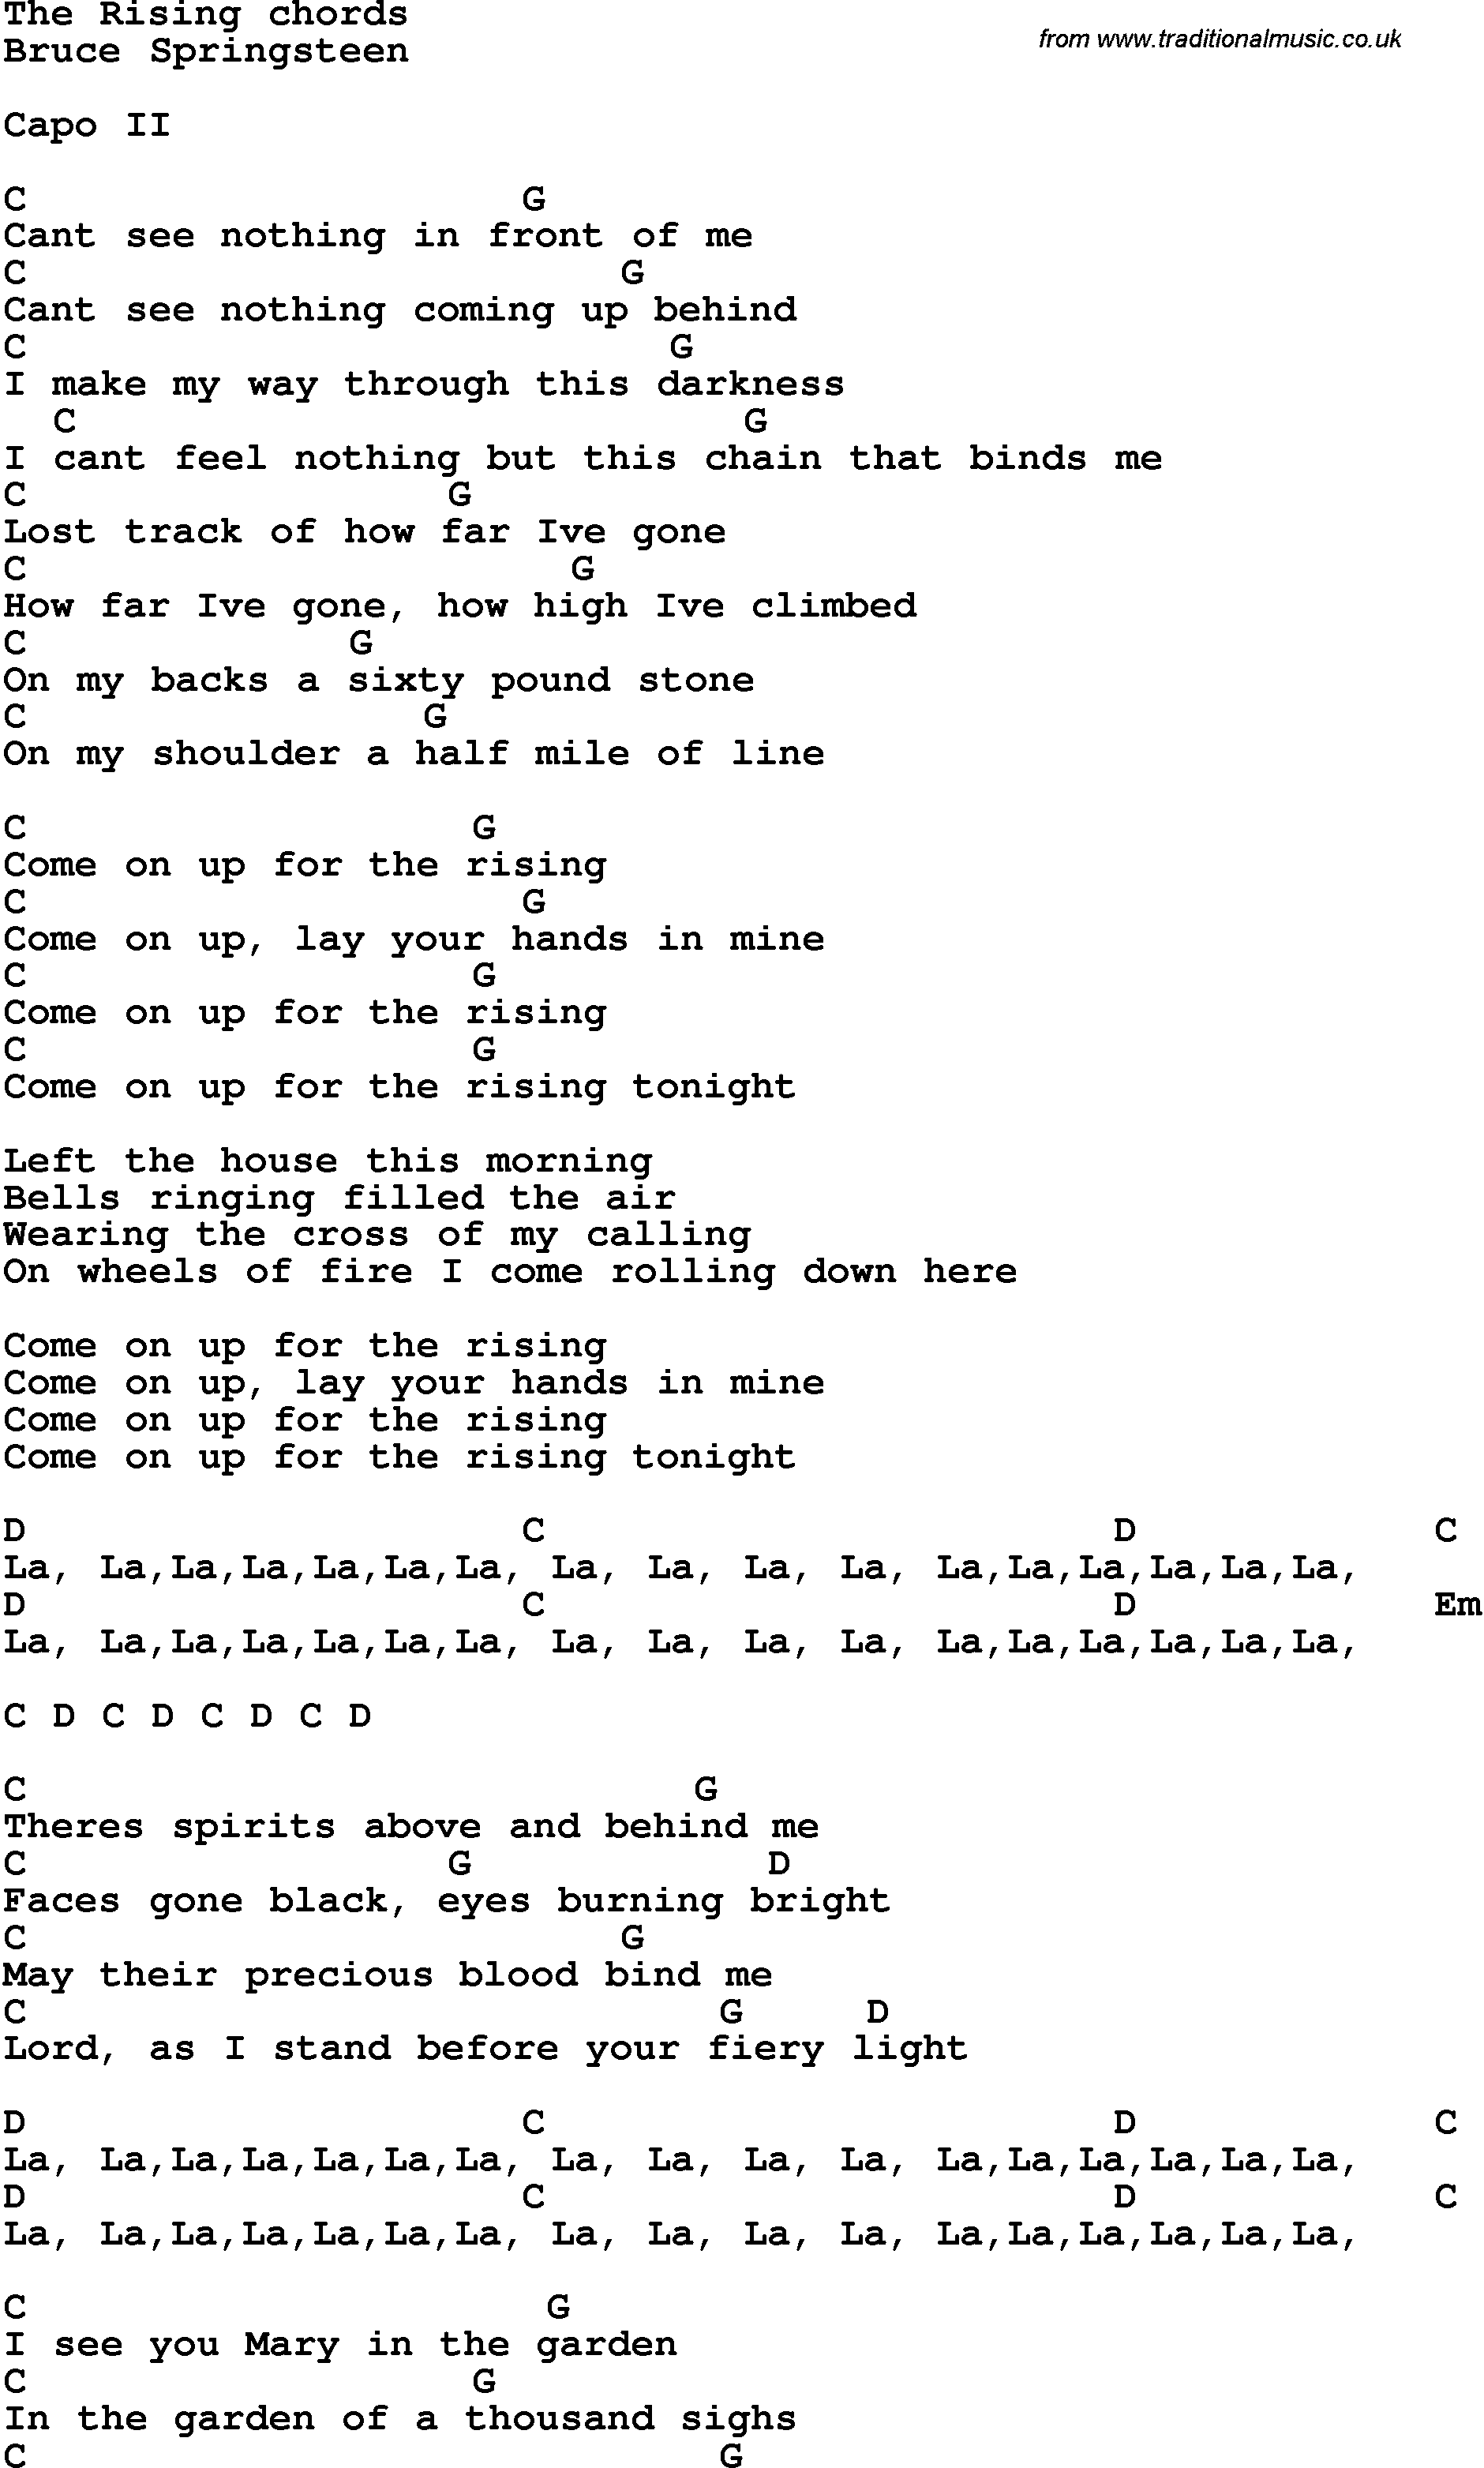 Bruce Springsteen - The Rising: lyrics and songs